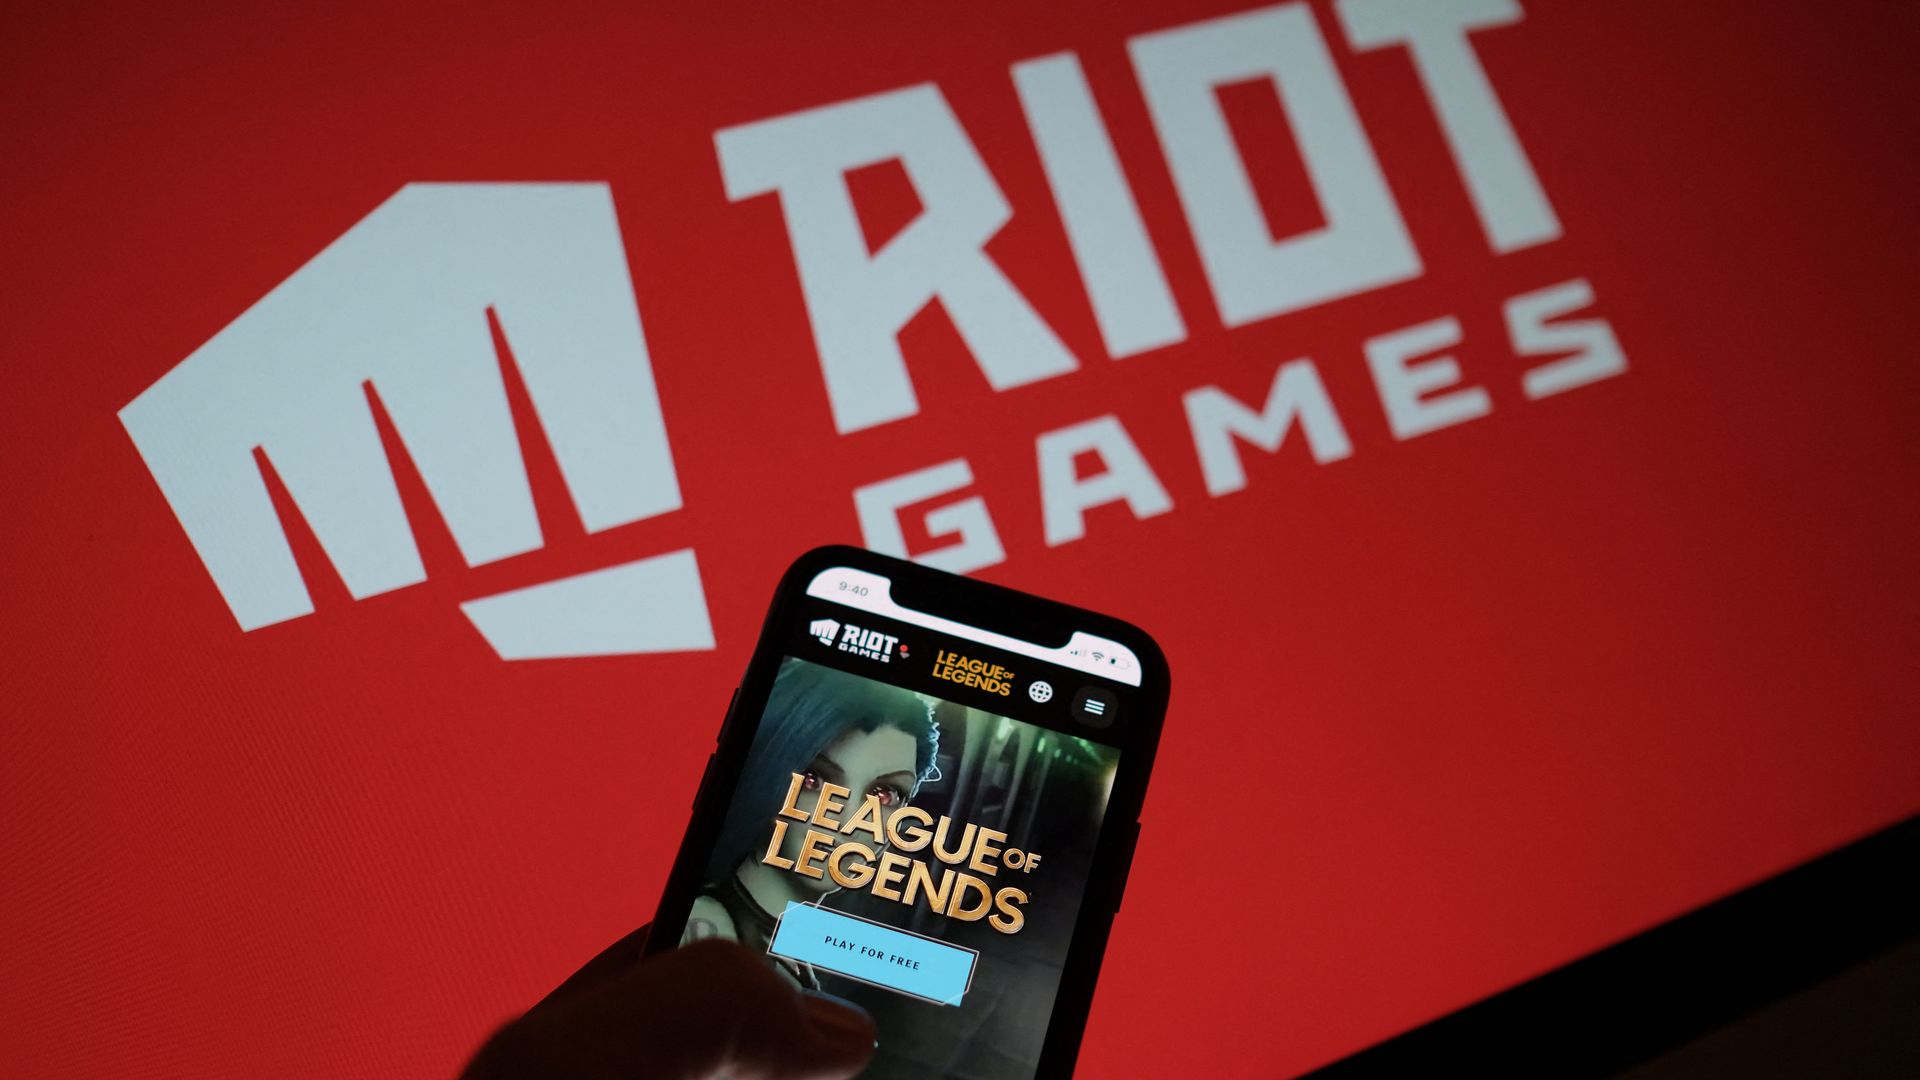 Photo of a phone showing the logo of League of Legends, held in front of a logo for Riot Games